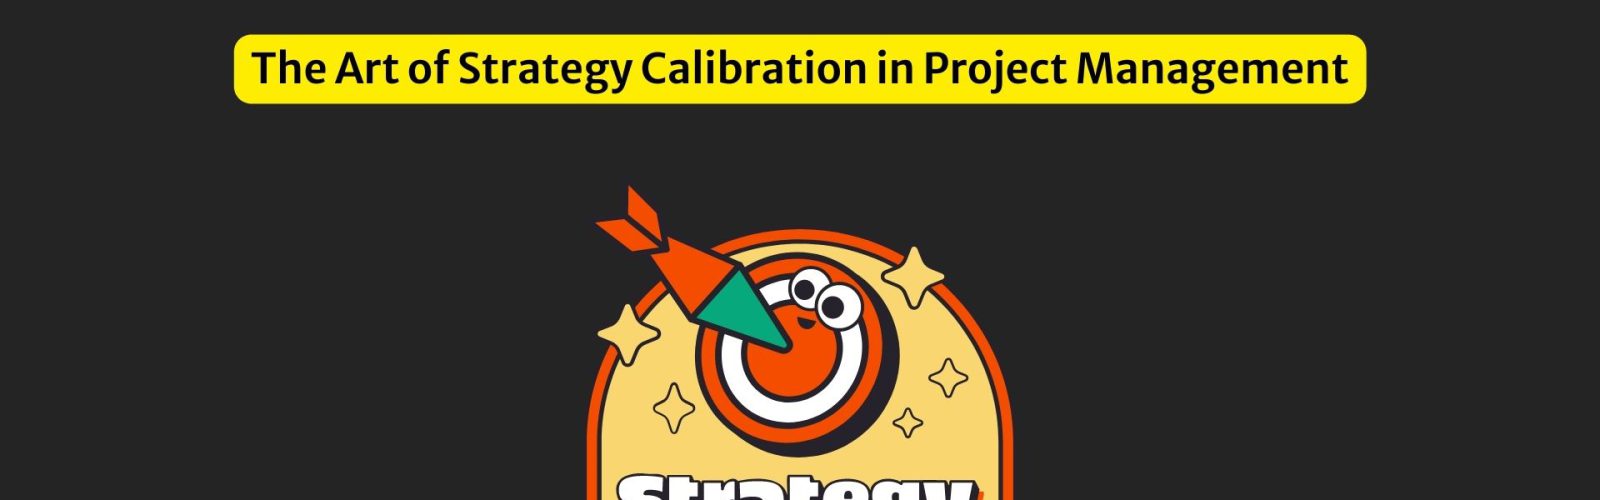 The Art of Strategy Calibration in Project Management